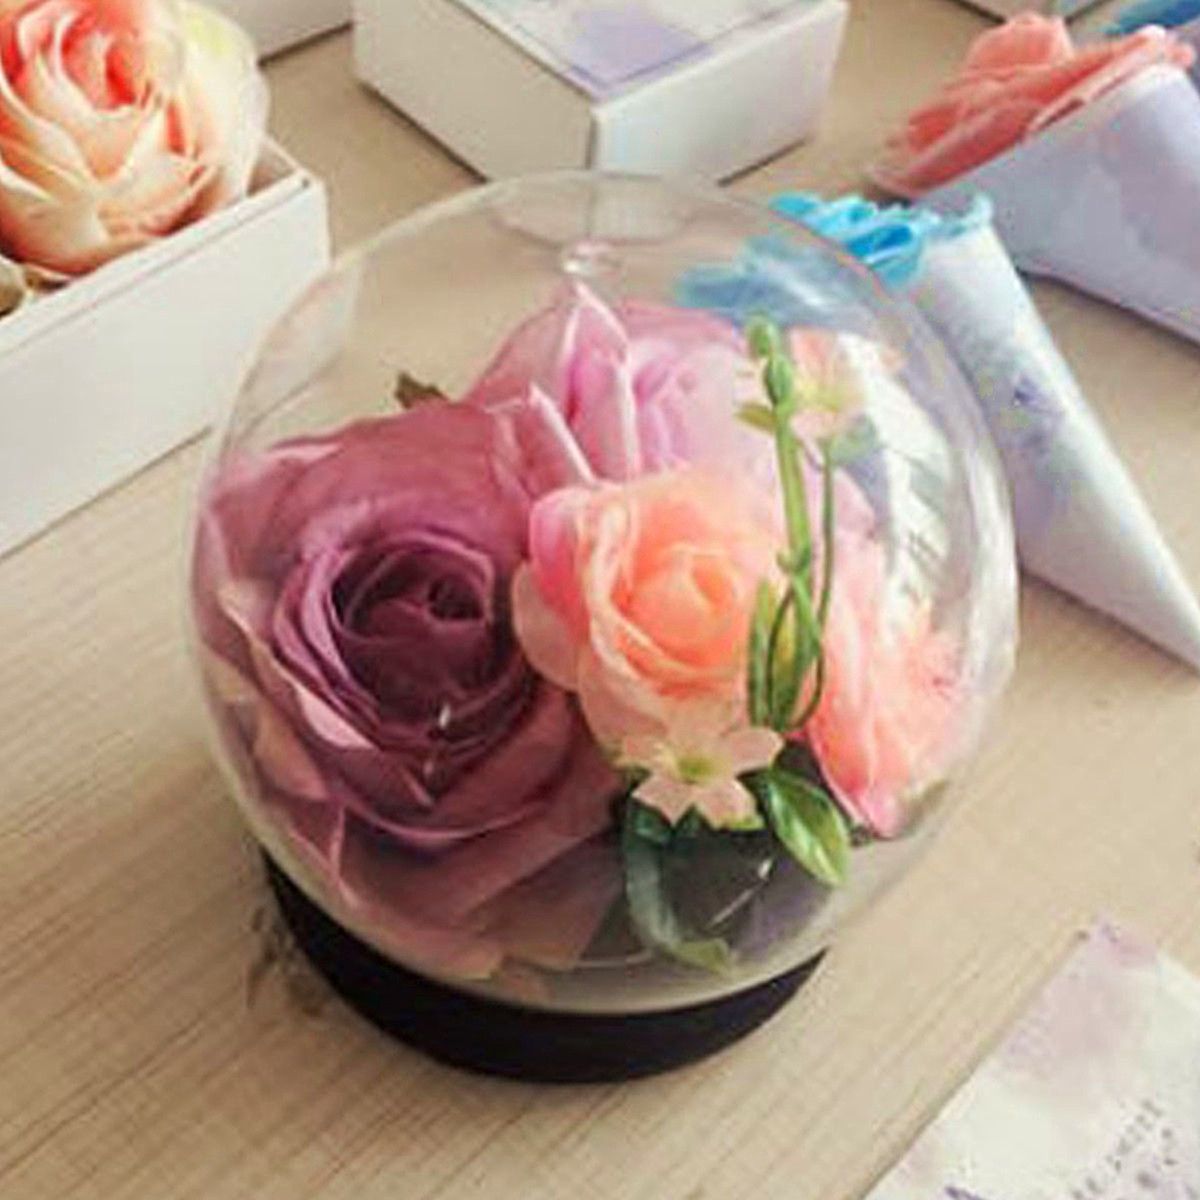 12cm-Glass-Dome-Ball-Cloche-Globe-Bell-Jar-Tealight-Flower-Cover-Stand-Display-Room-Decorations-1372890